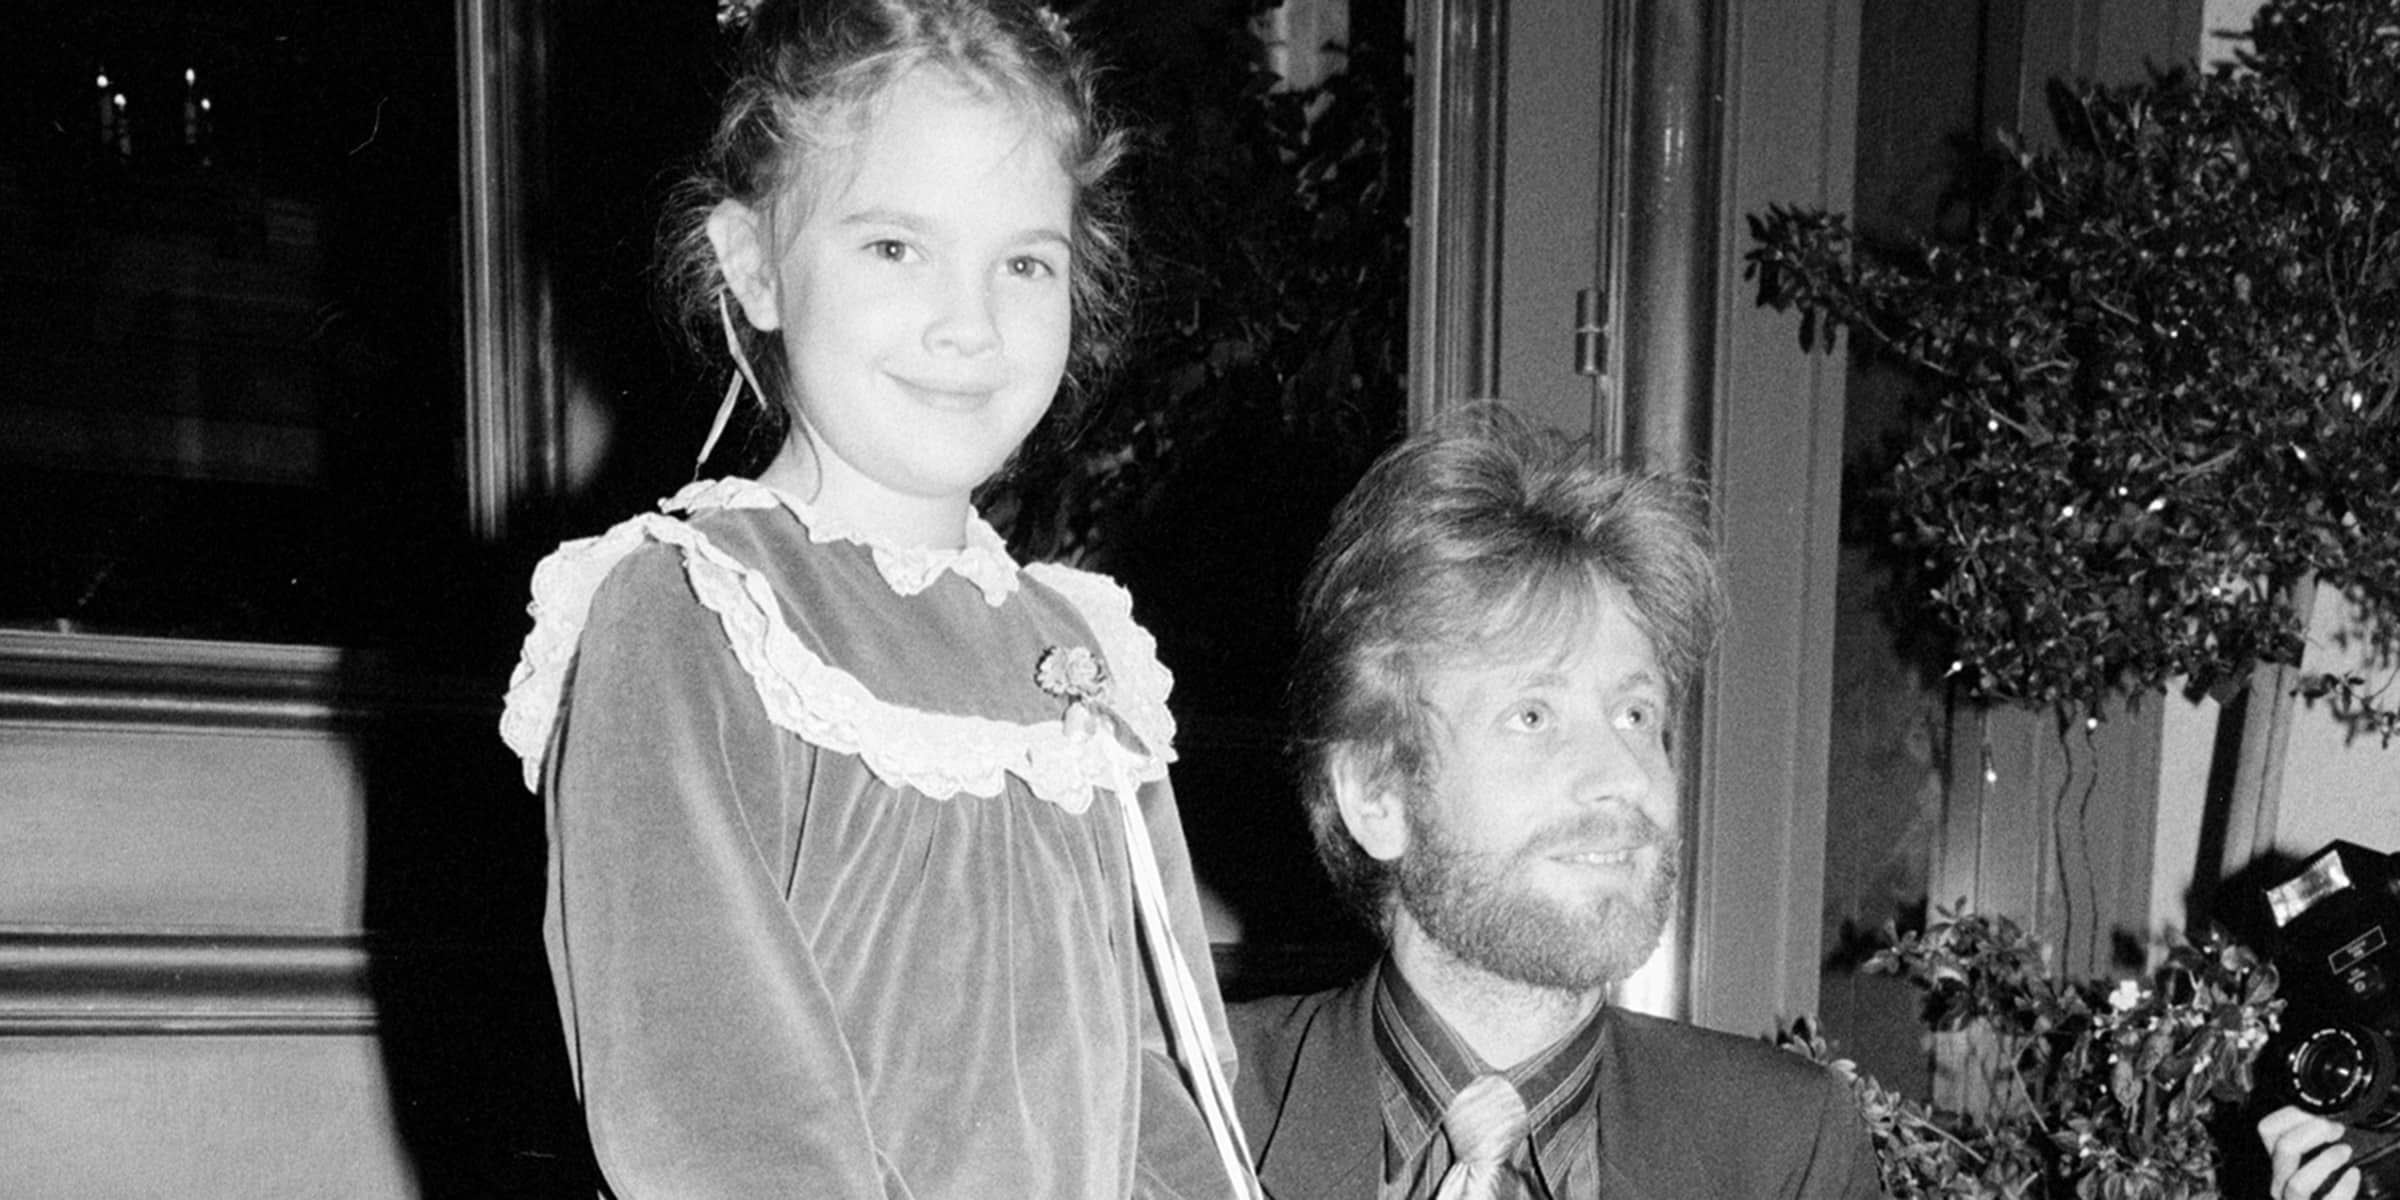 Drew Barrymore reflects about her parents and John Barrymore